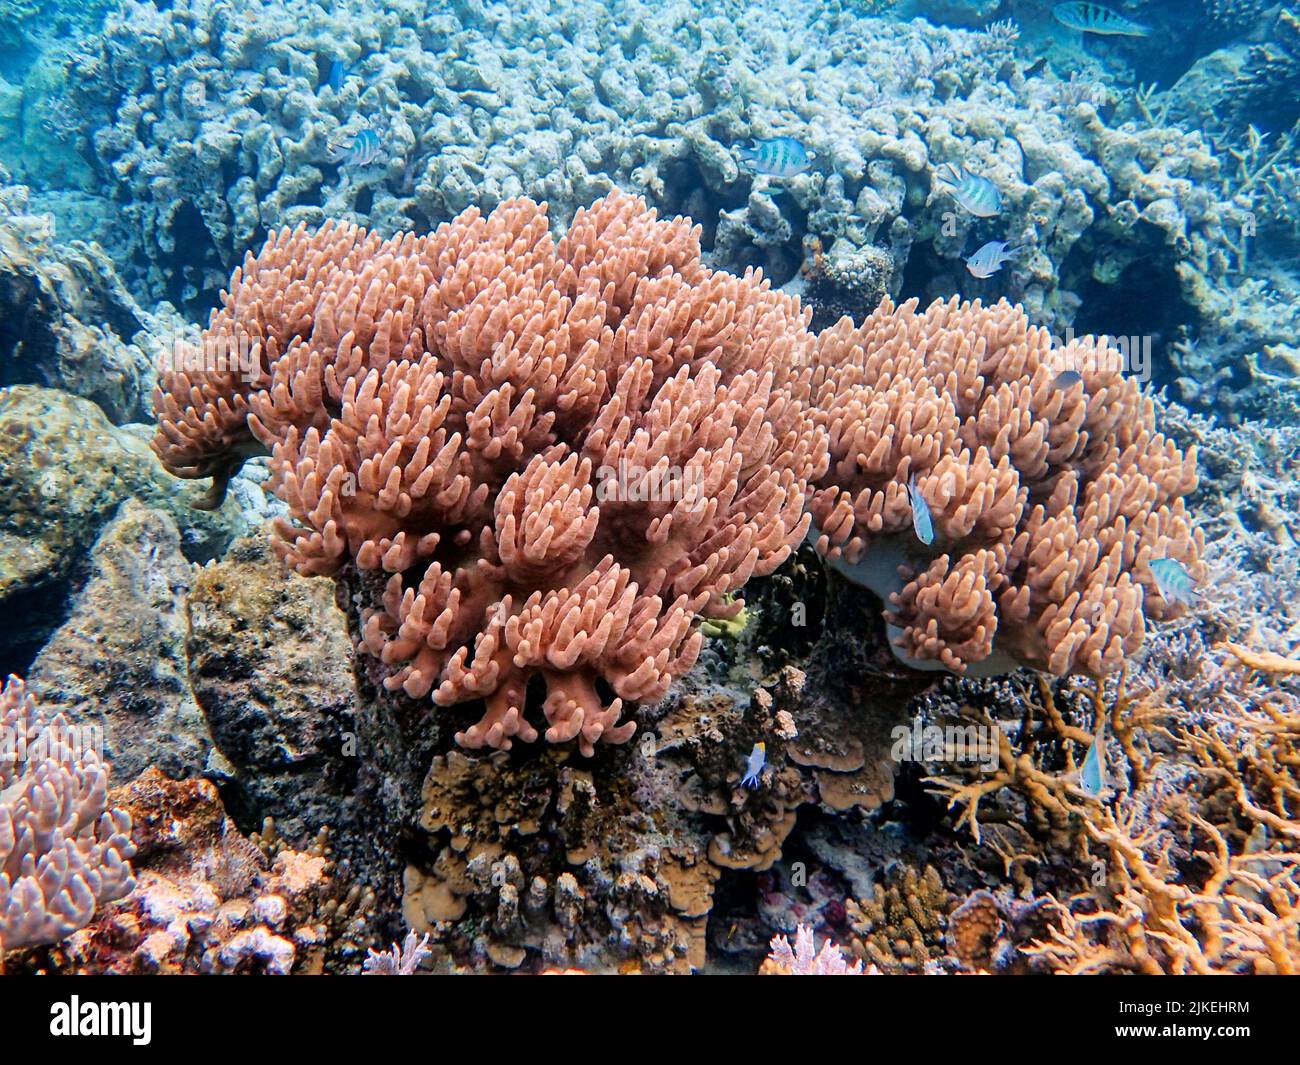 Indonesia Anambas Islands - Colorful coral reef with tropical fish Stock Photo